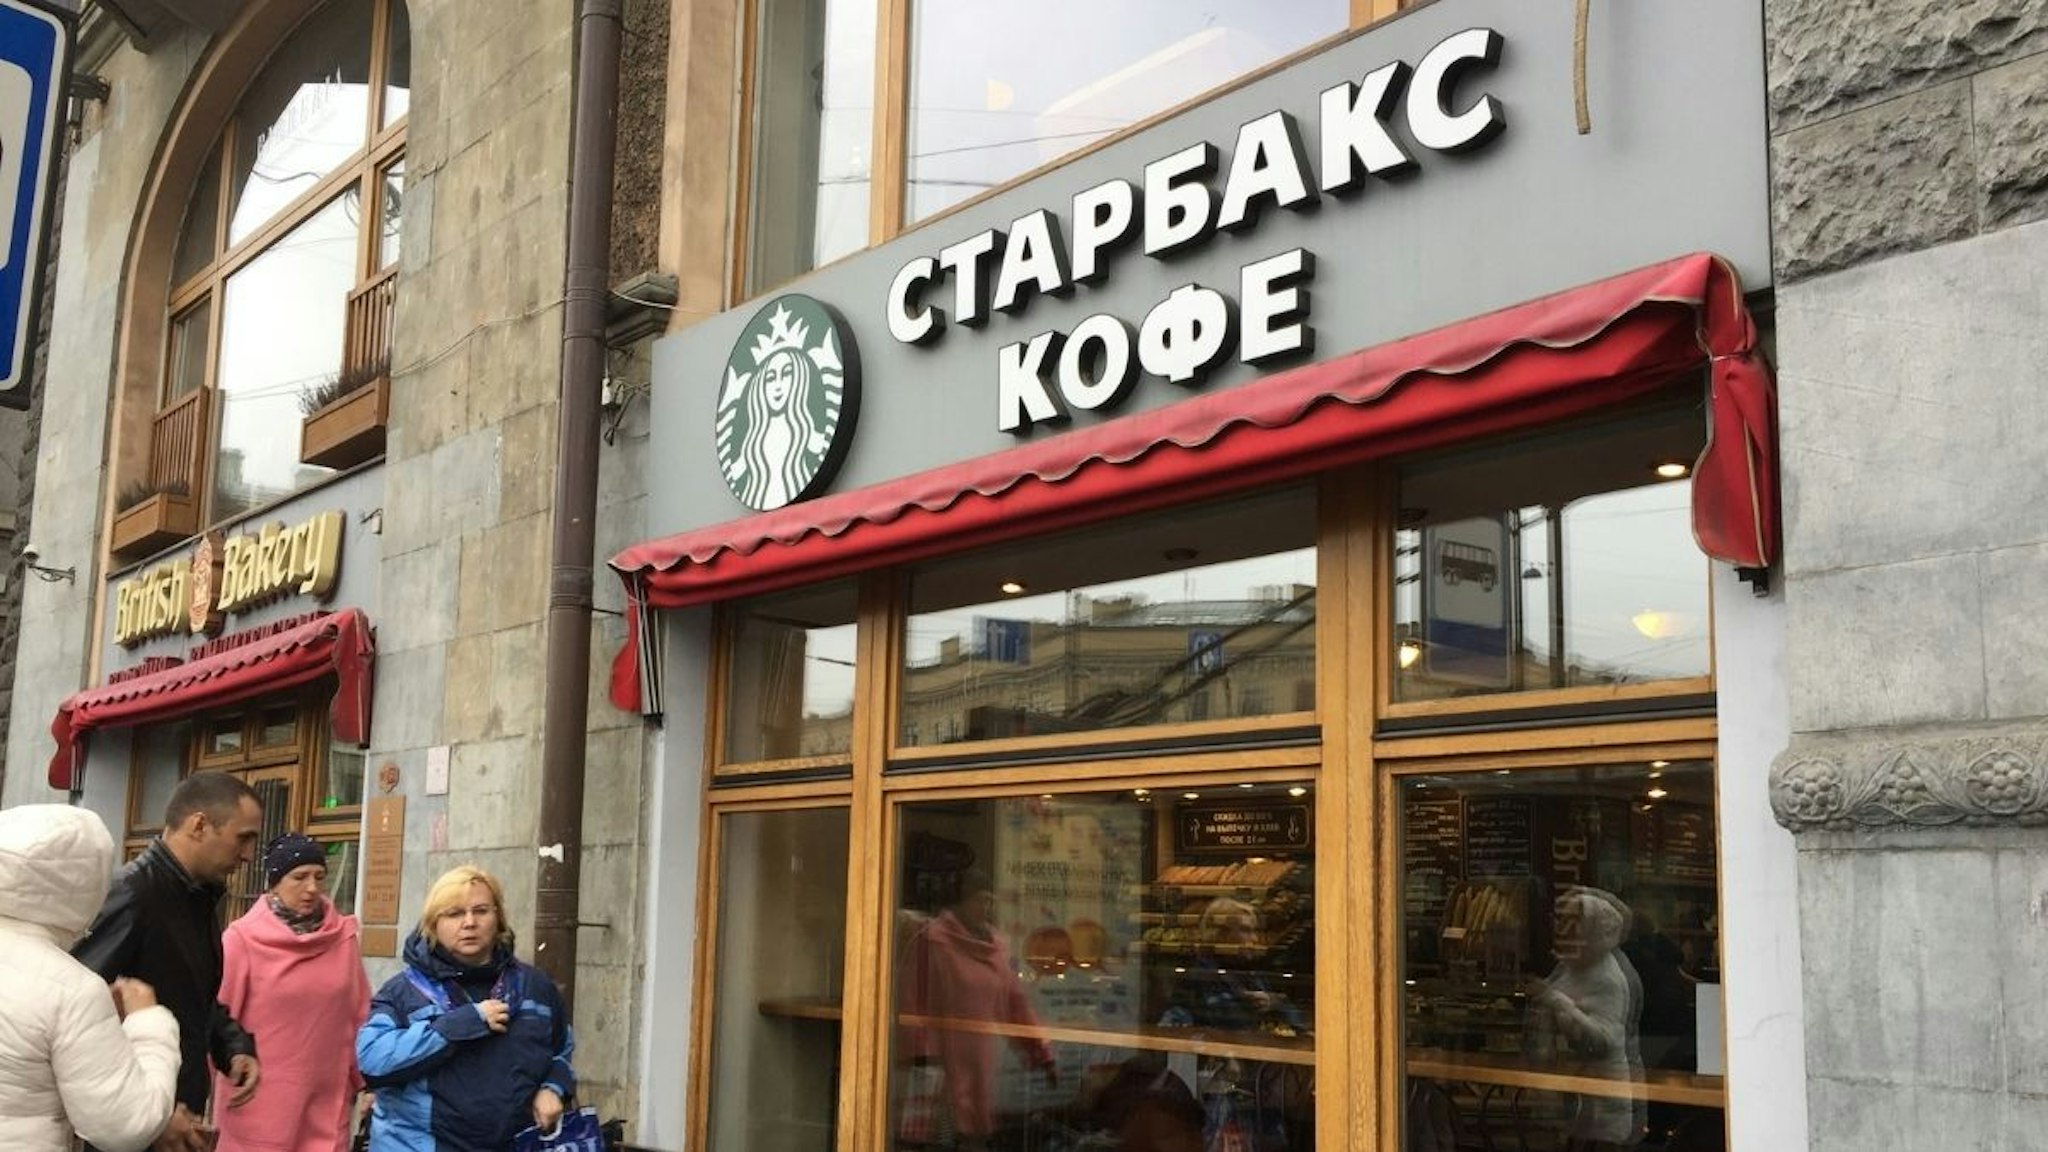 A branch of Starbucks in the Russian city of St Petersburg.